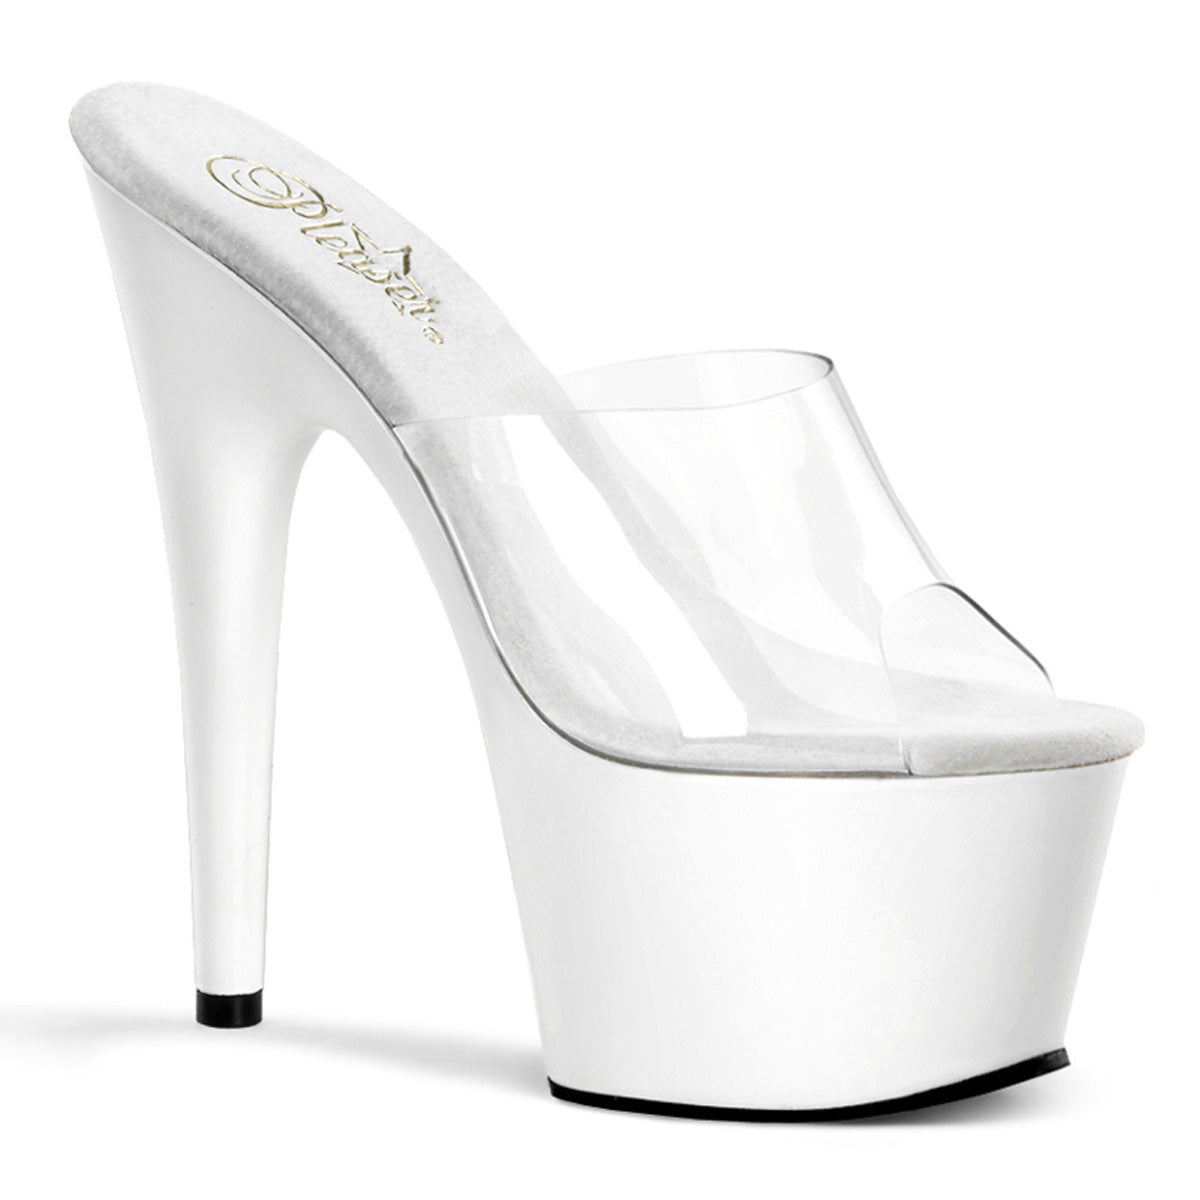 ADORE-701 Sexy 7 Inch Heel Clear and White Stripper Sandals-Pleaser- Sexy Shoes